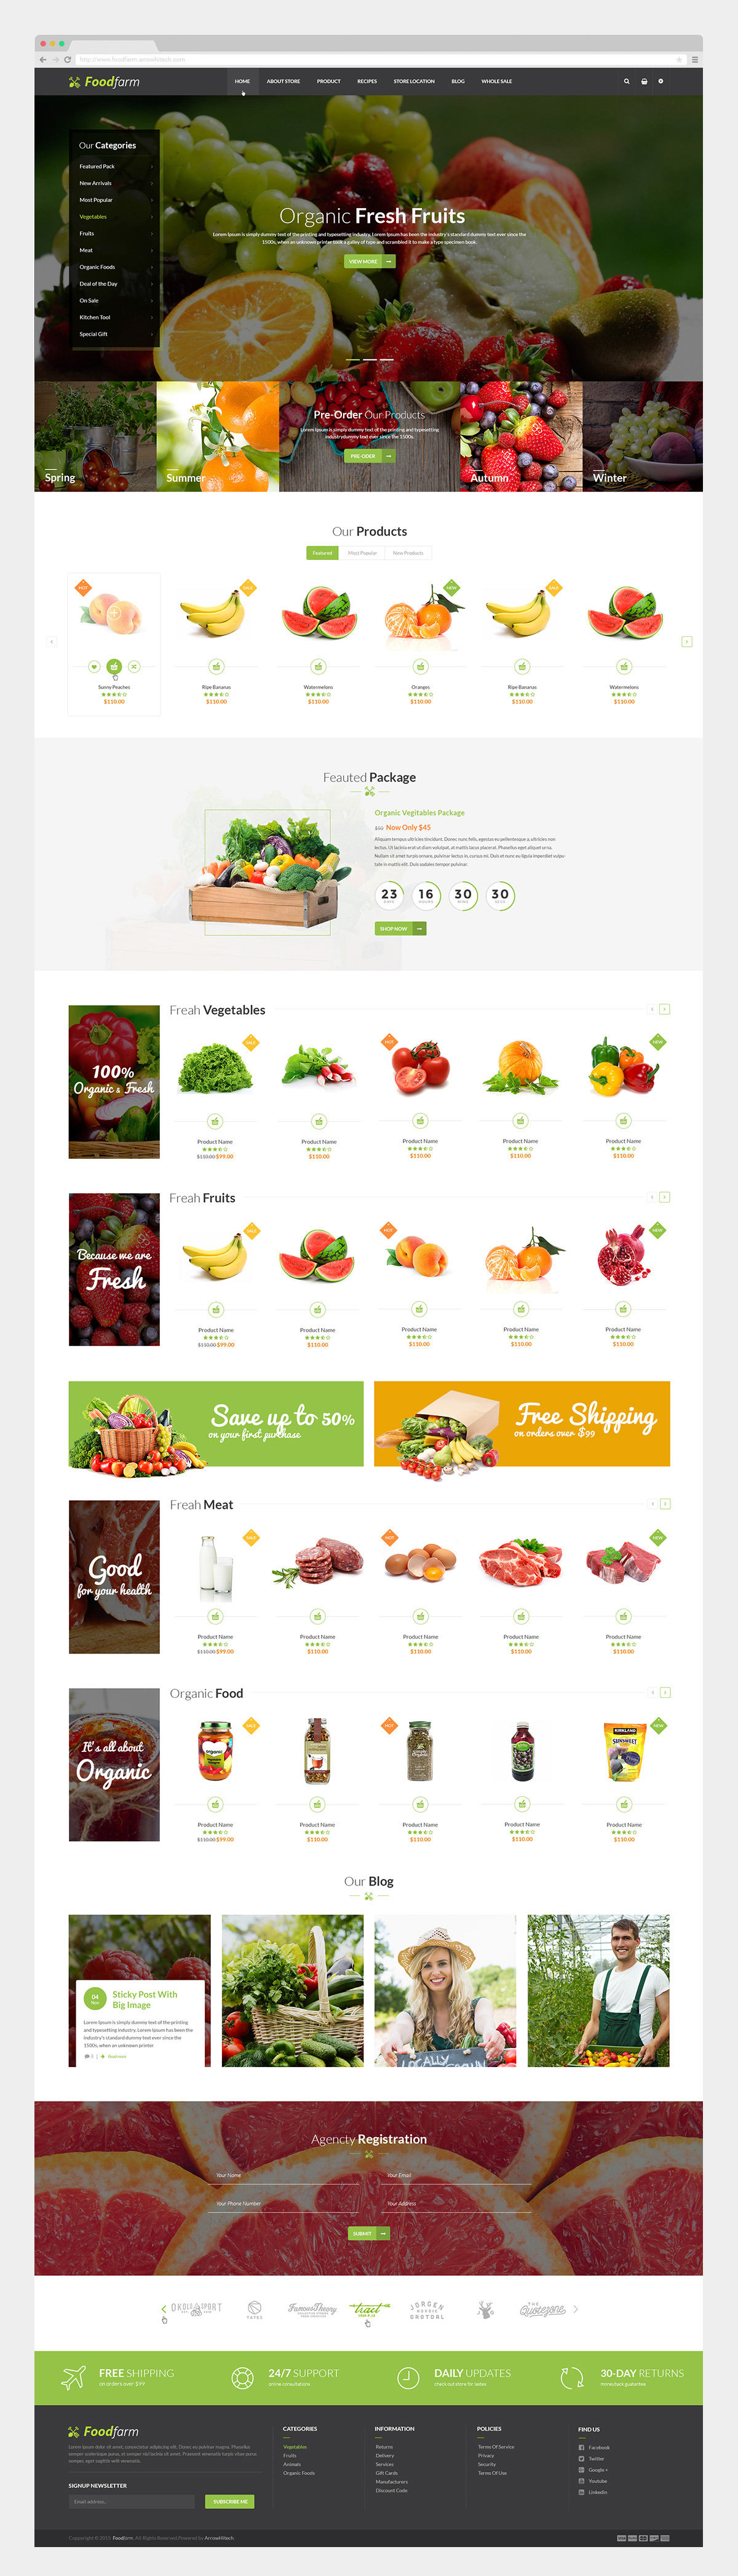 photoshop ux UI Food  farm organic Ecommerce Retail seed green vegetables meat fish fruits